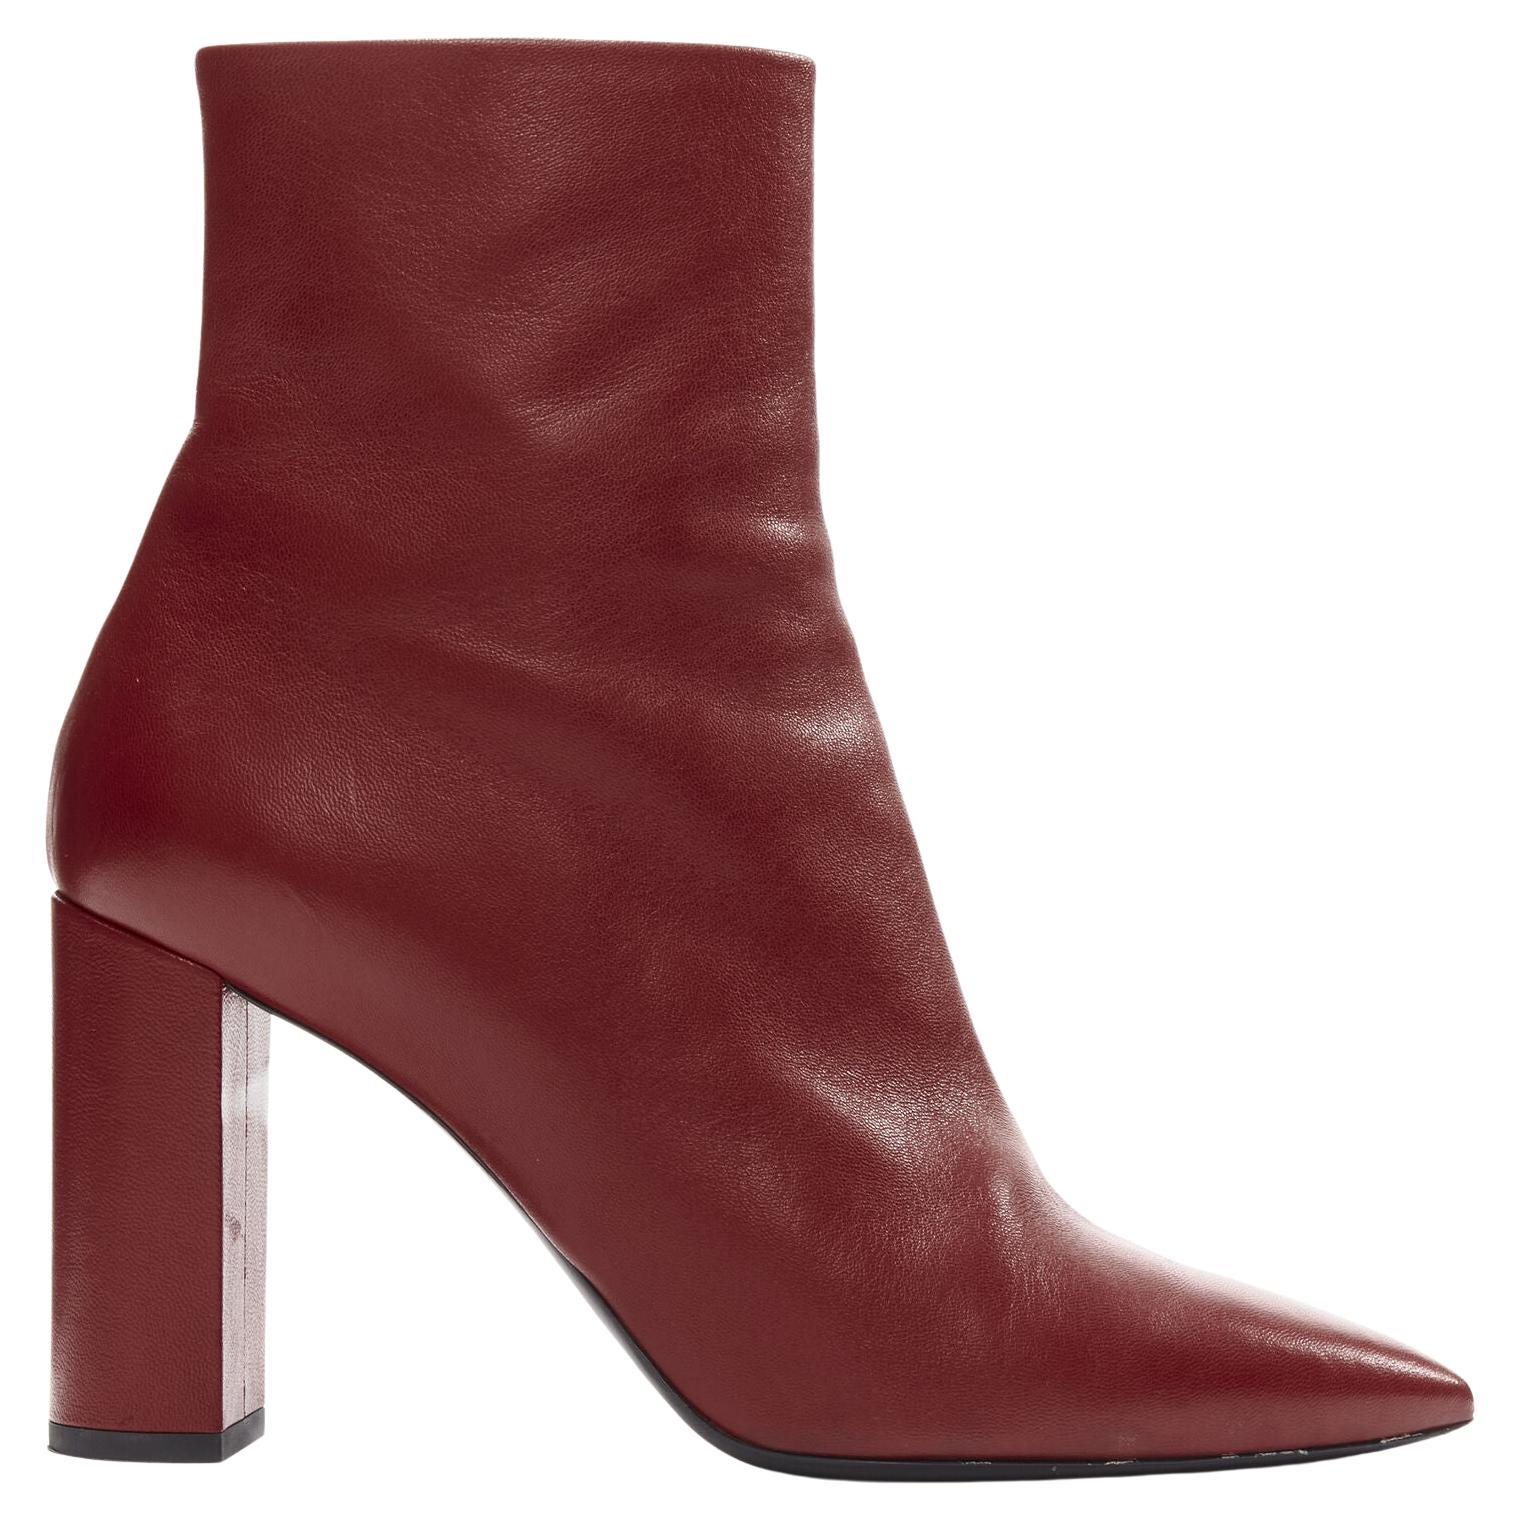 SAINT LAURENT red leather point toe block heeled ankle boots EU39 US9 For Sale